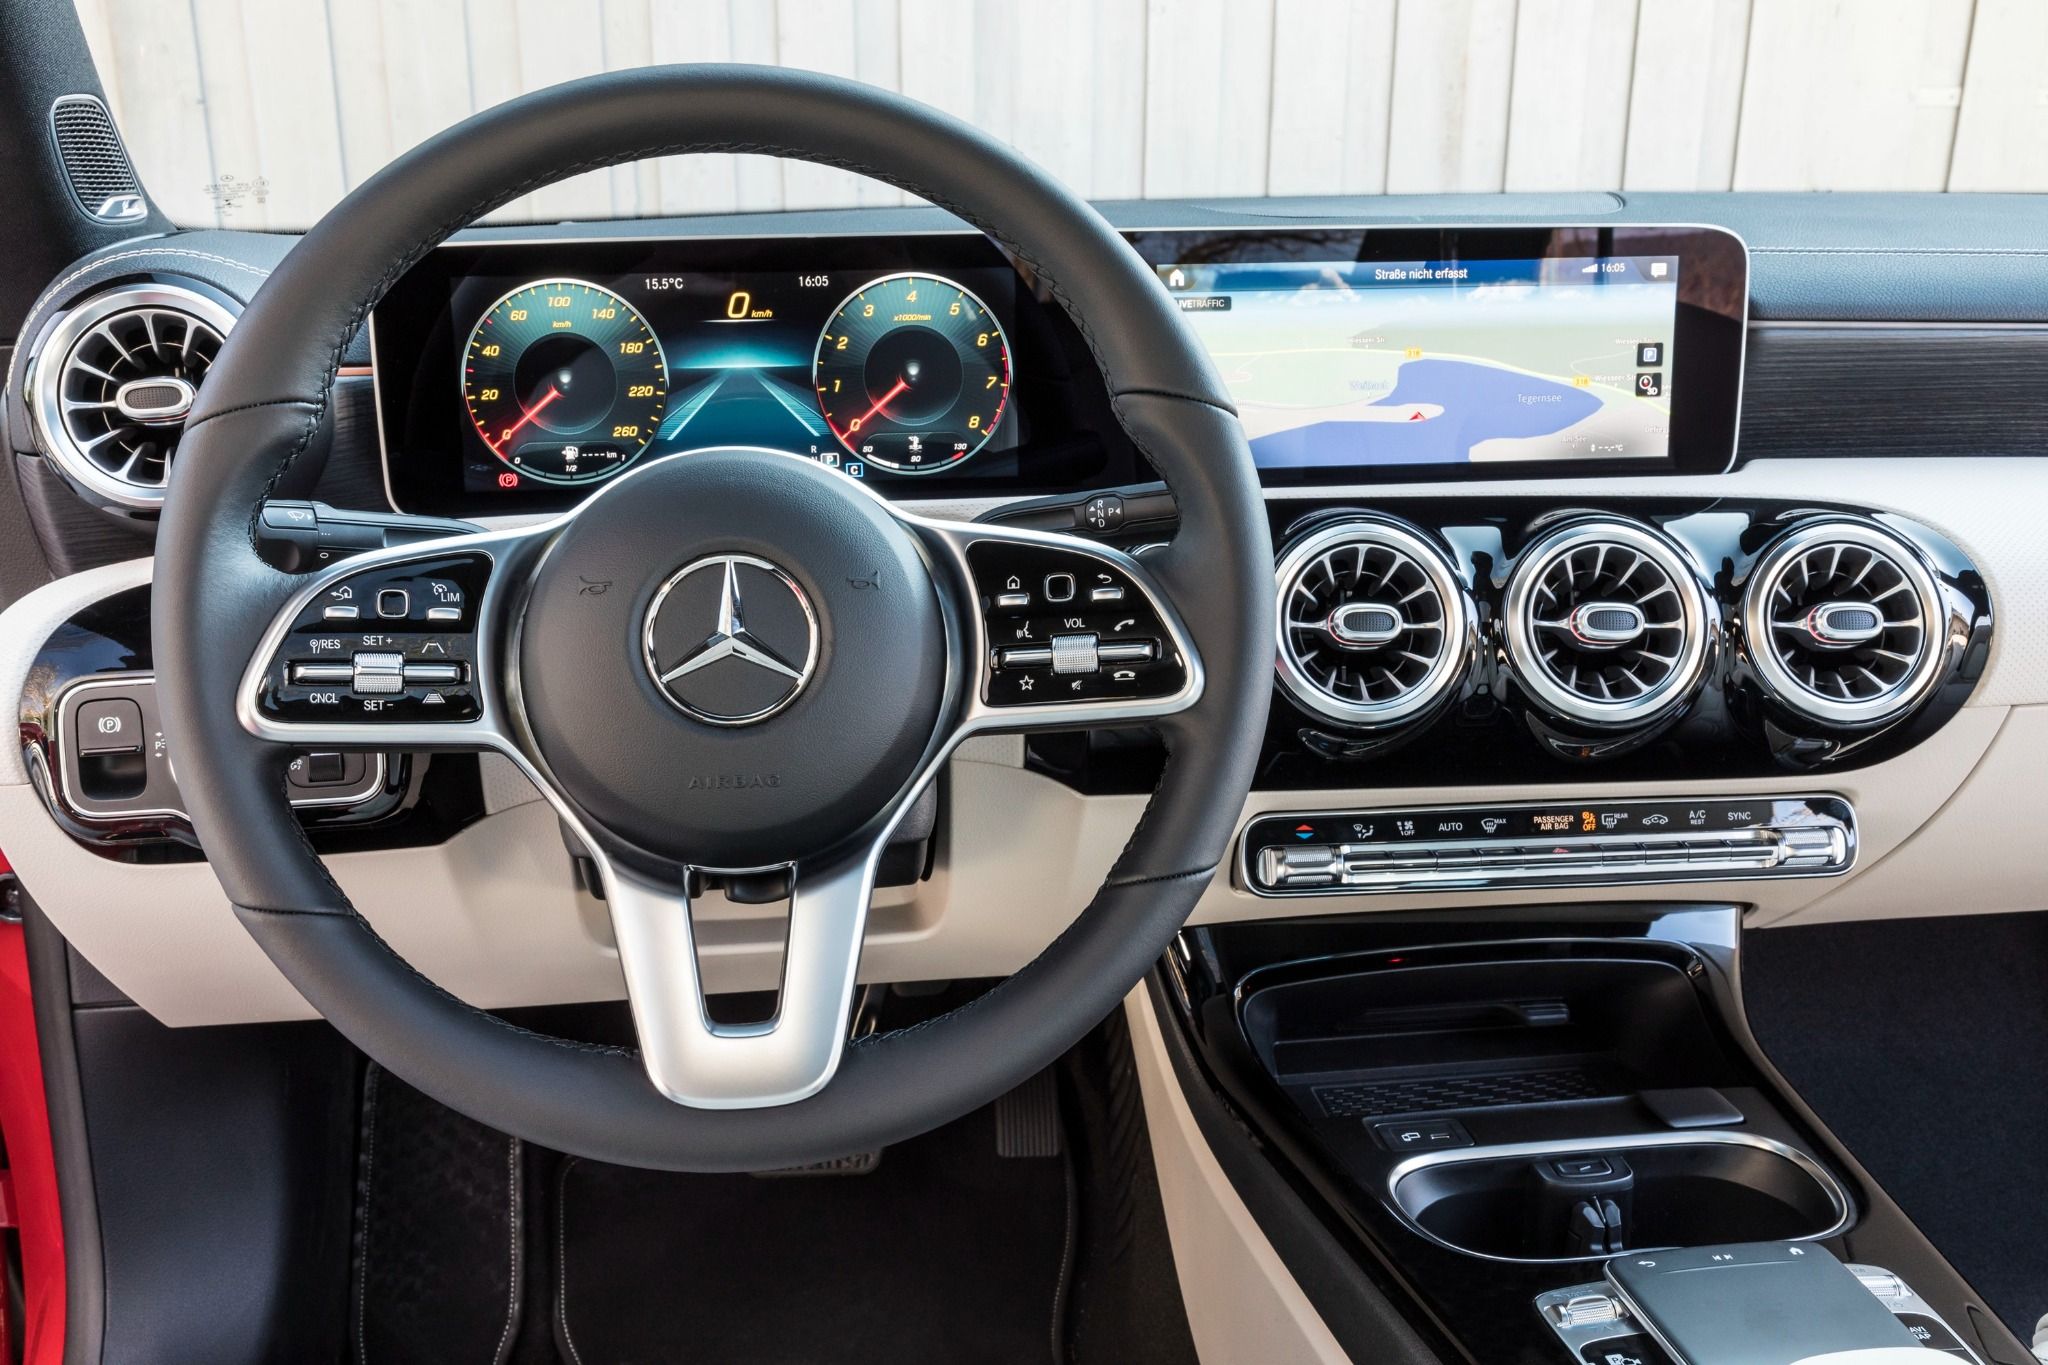 Interior view of the dashboard inside a Mercedes CLA